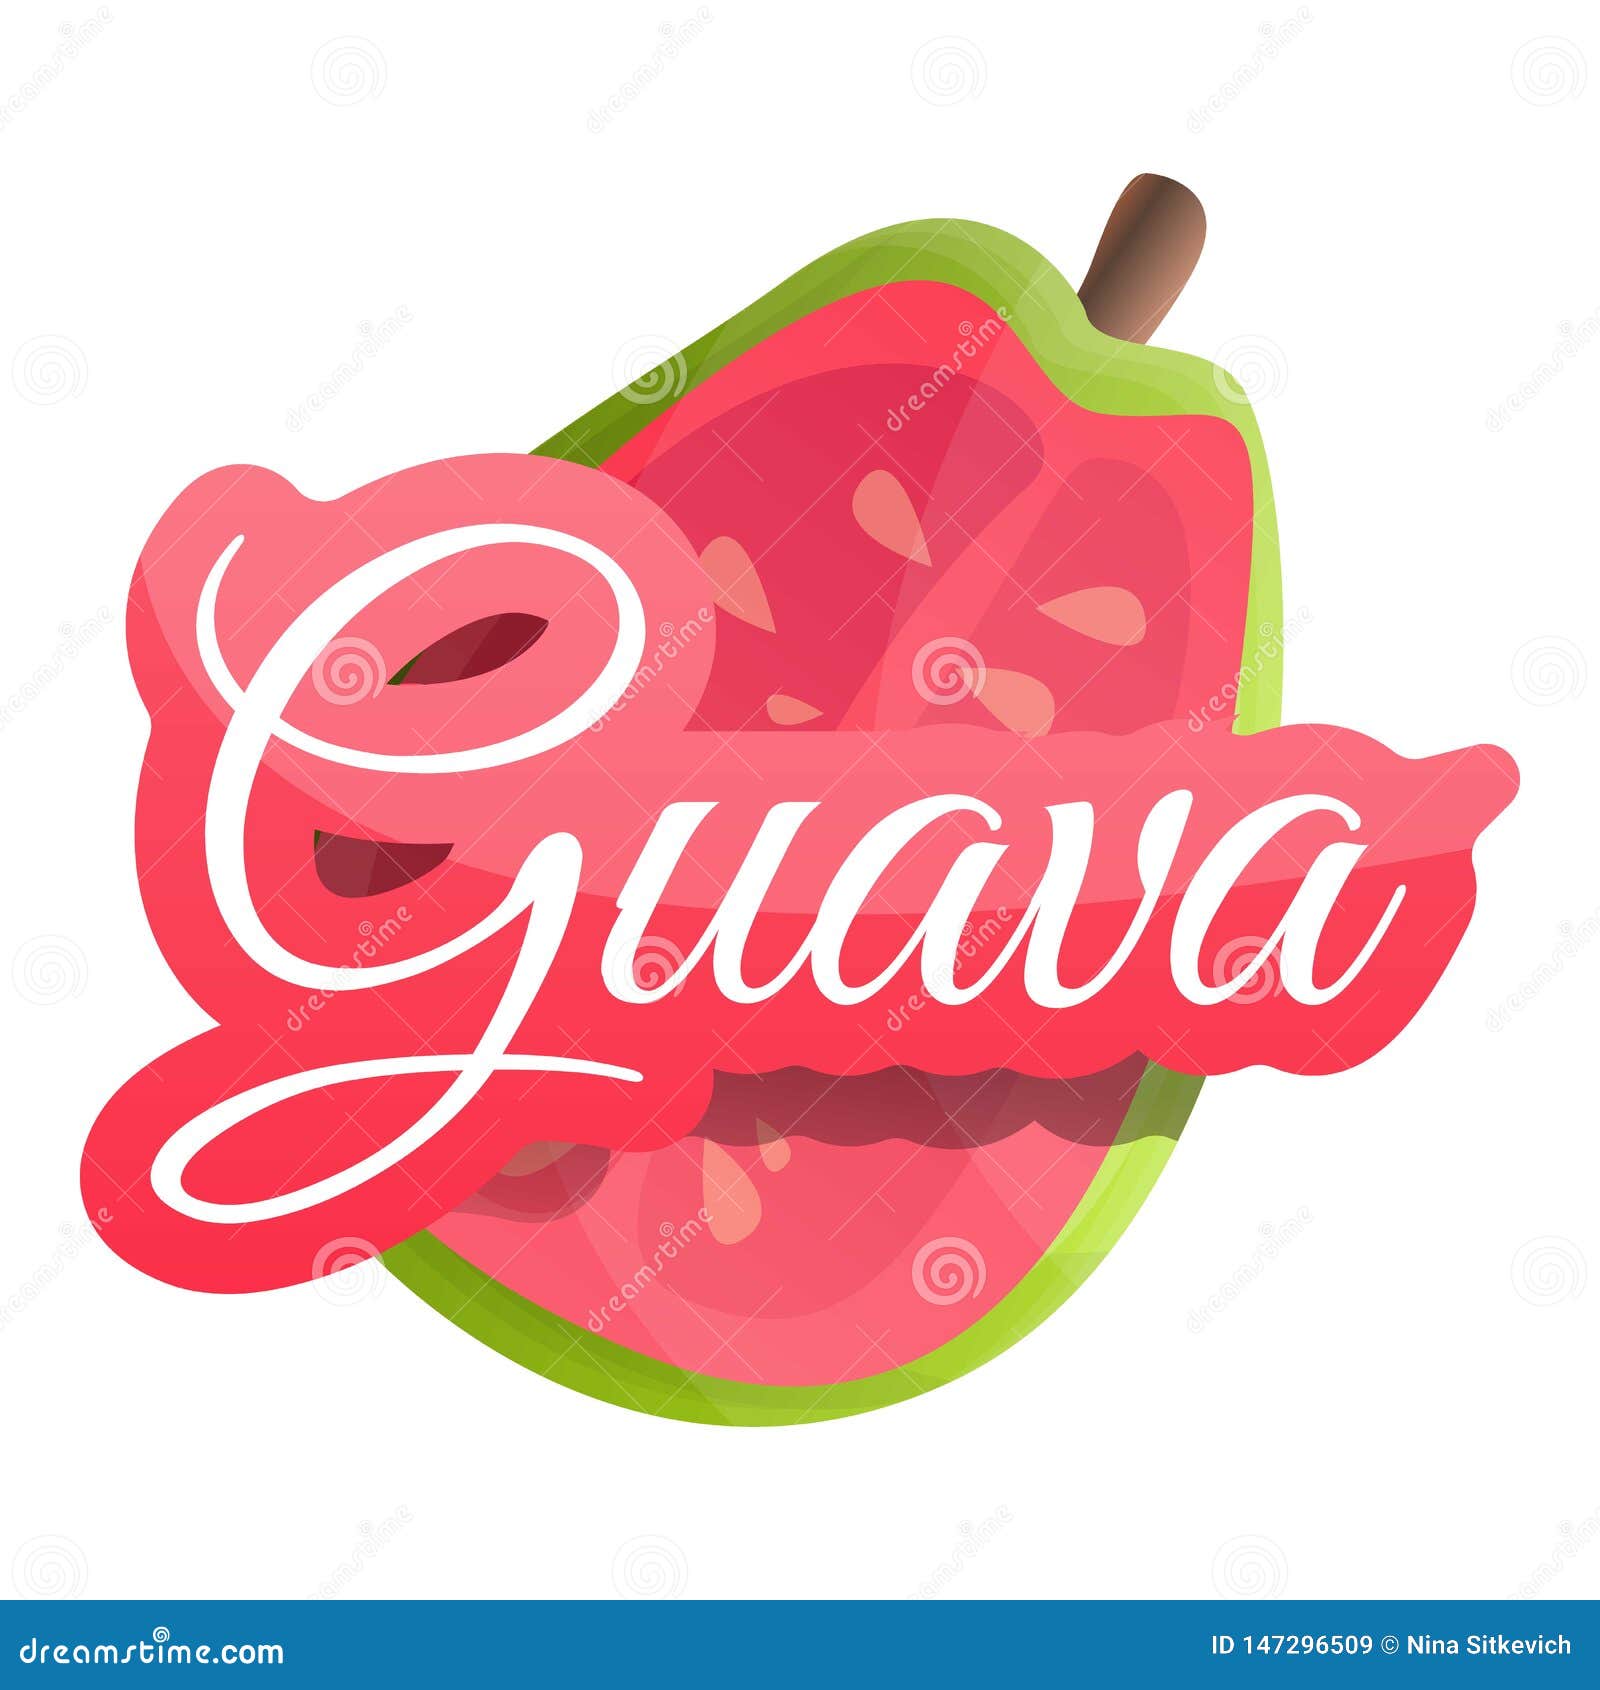 What are the benefits of Guava to your body ?